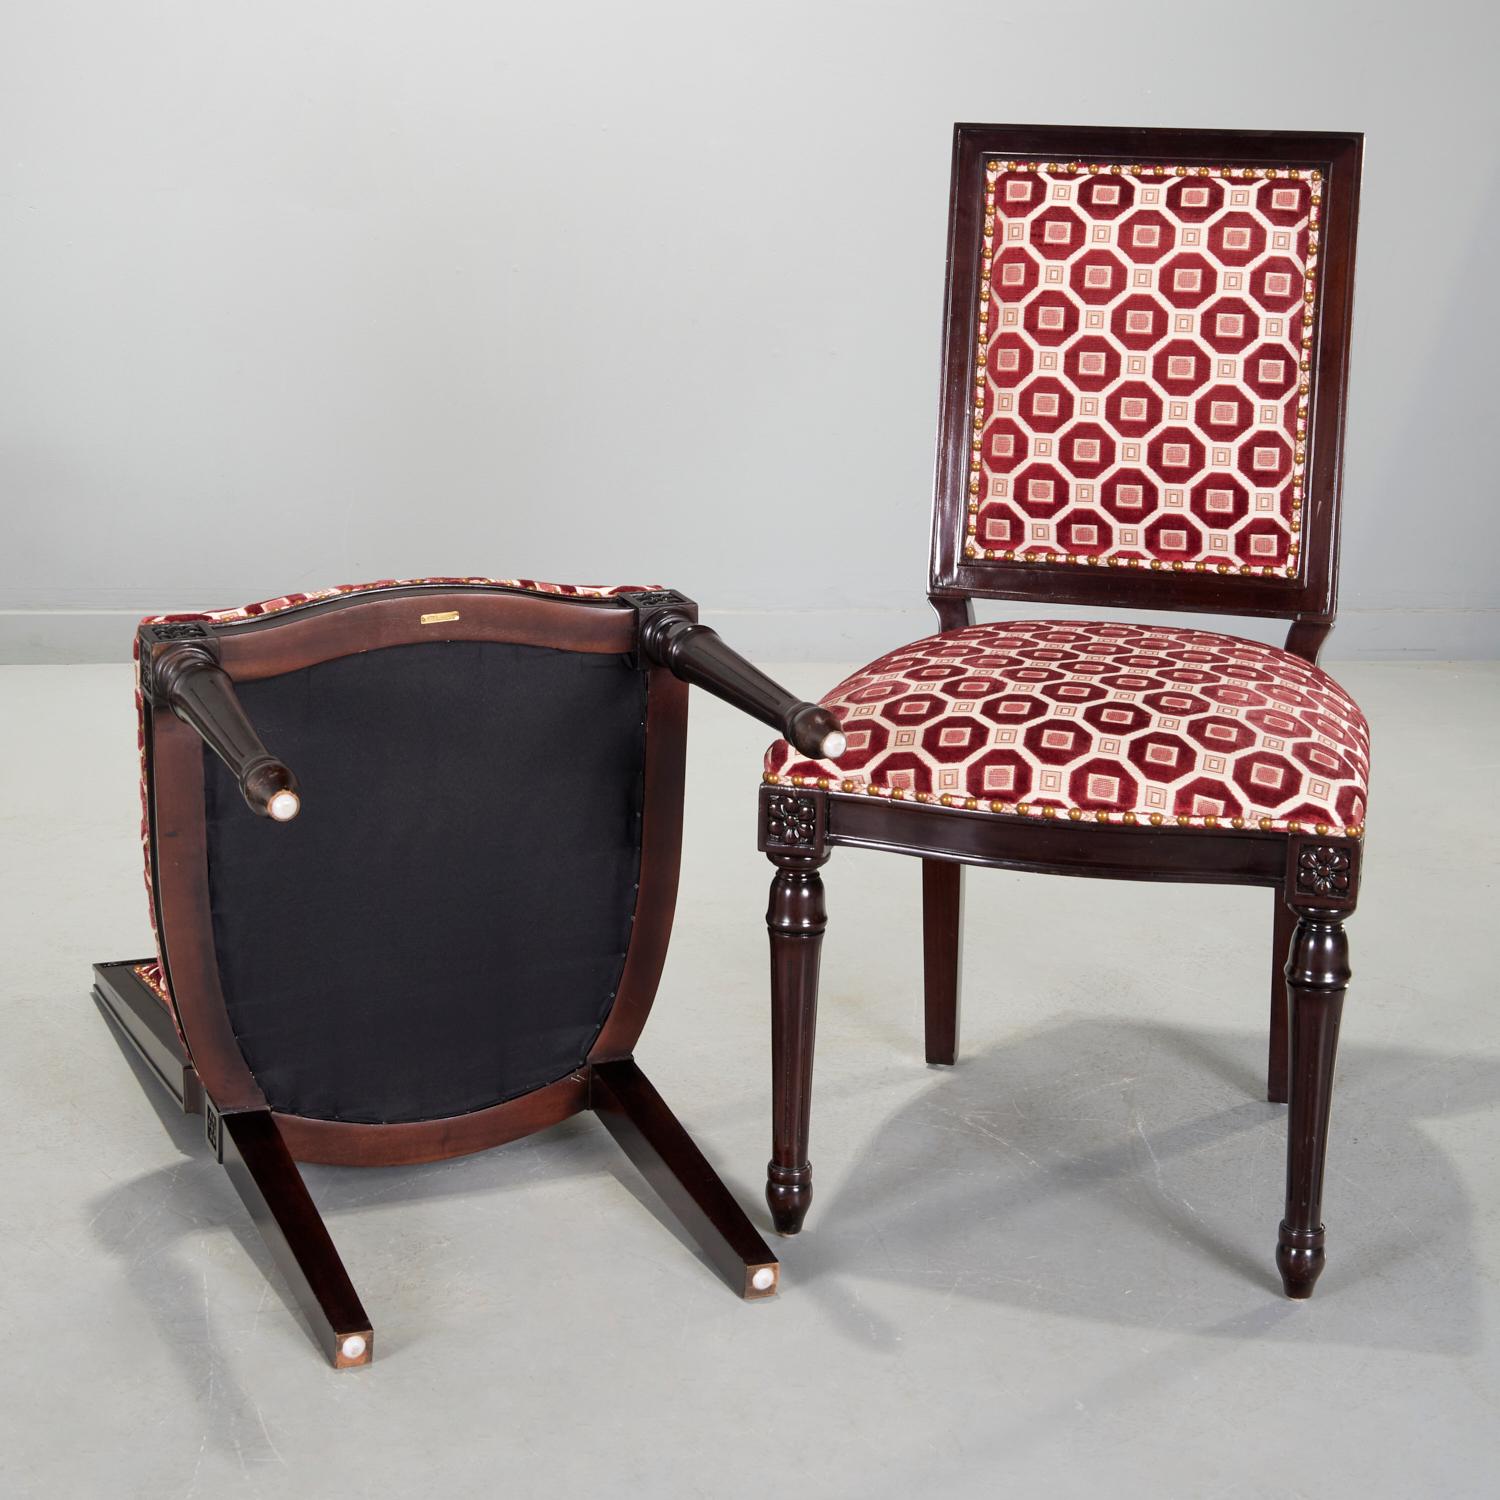 Contemporary Pair Oly Studio Louis XVI Style Chairs Upholstered in Geometric Cut Velvet